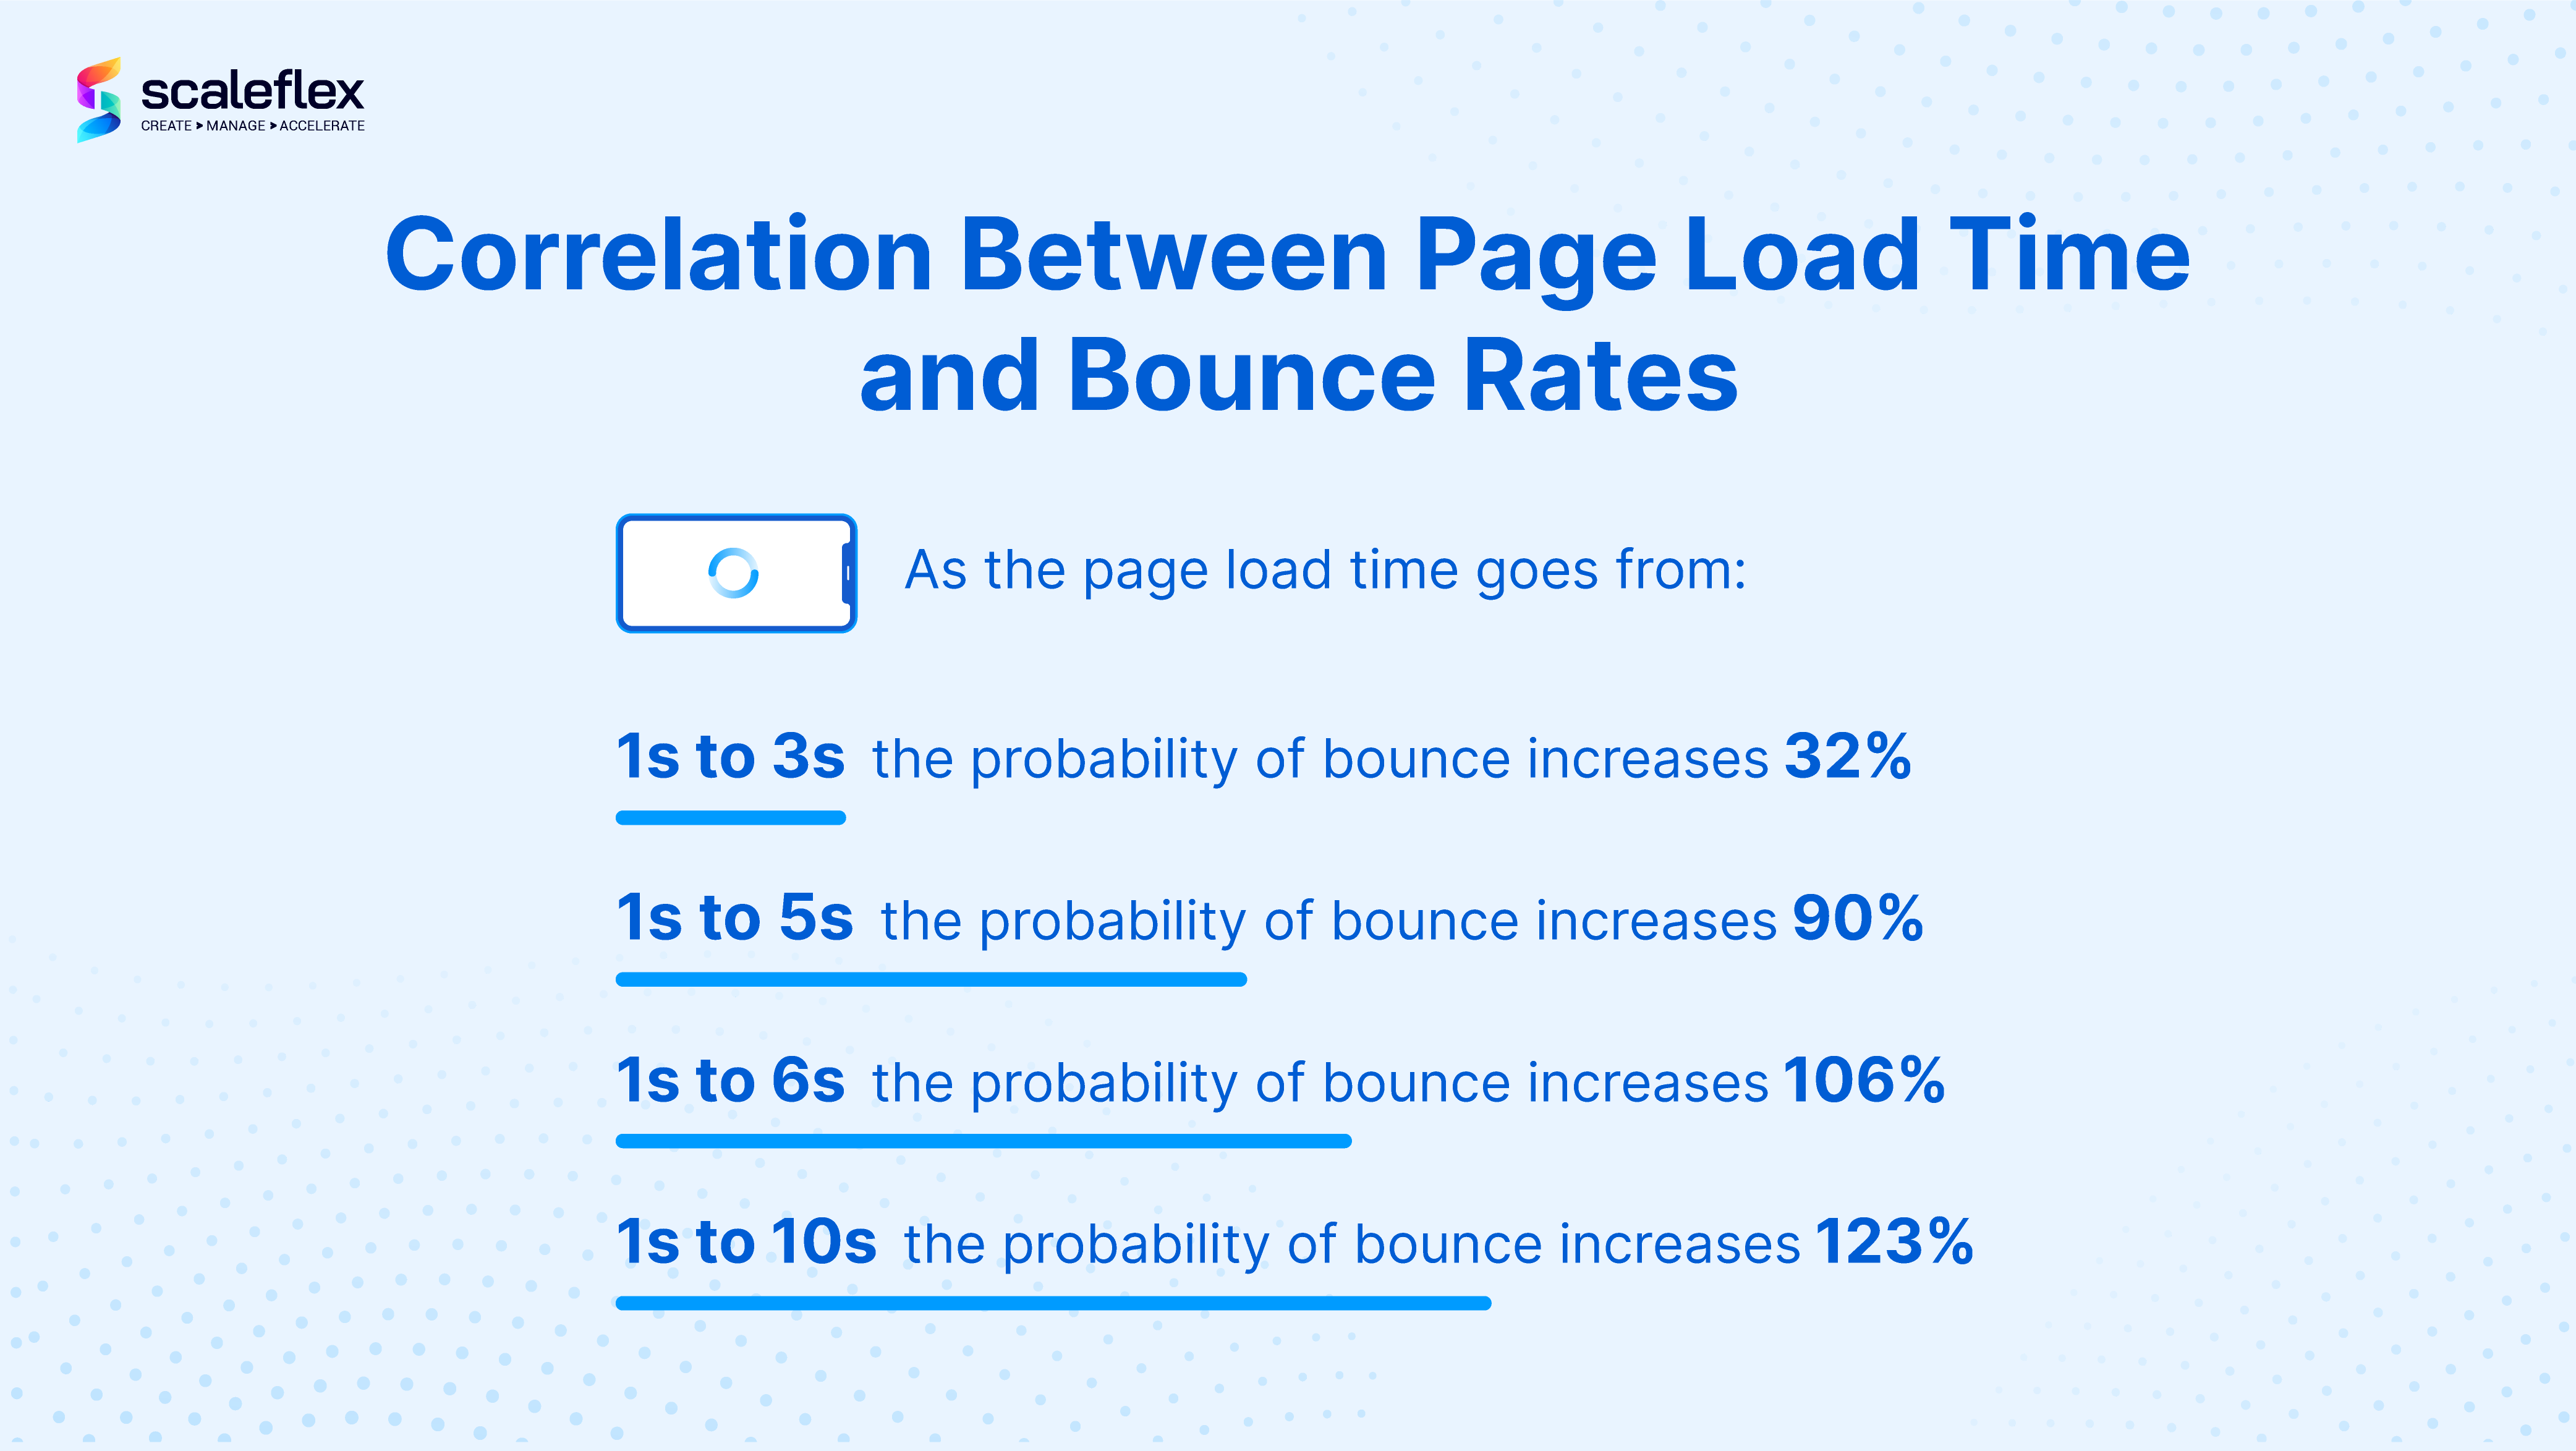 what is the relationship between page load time and bounce rates?